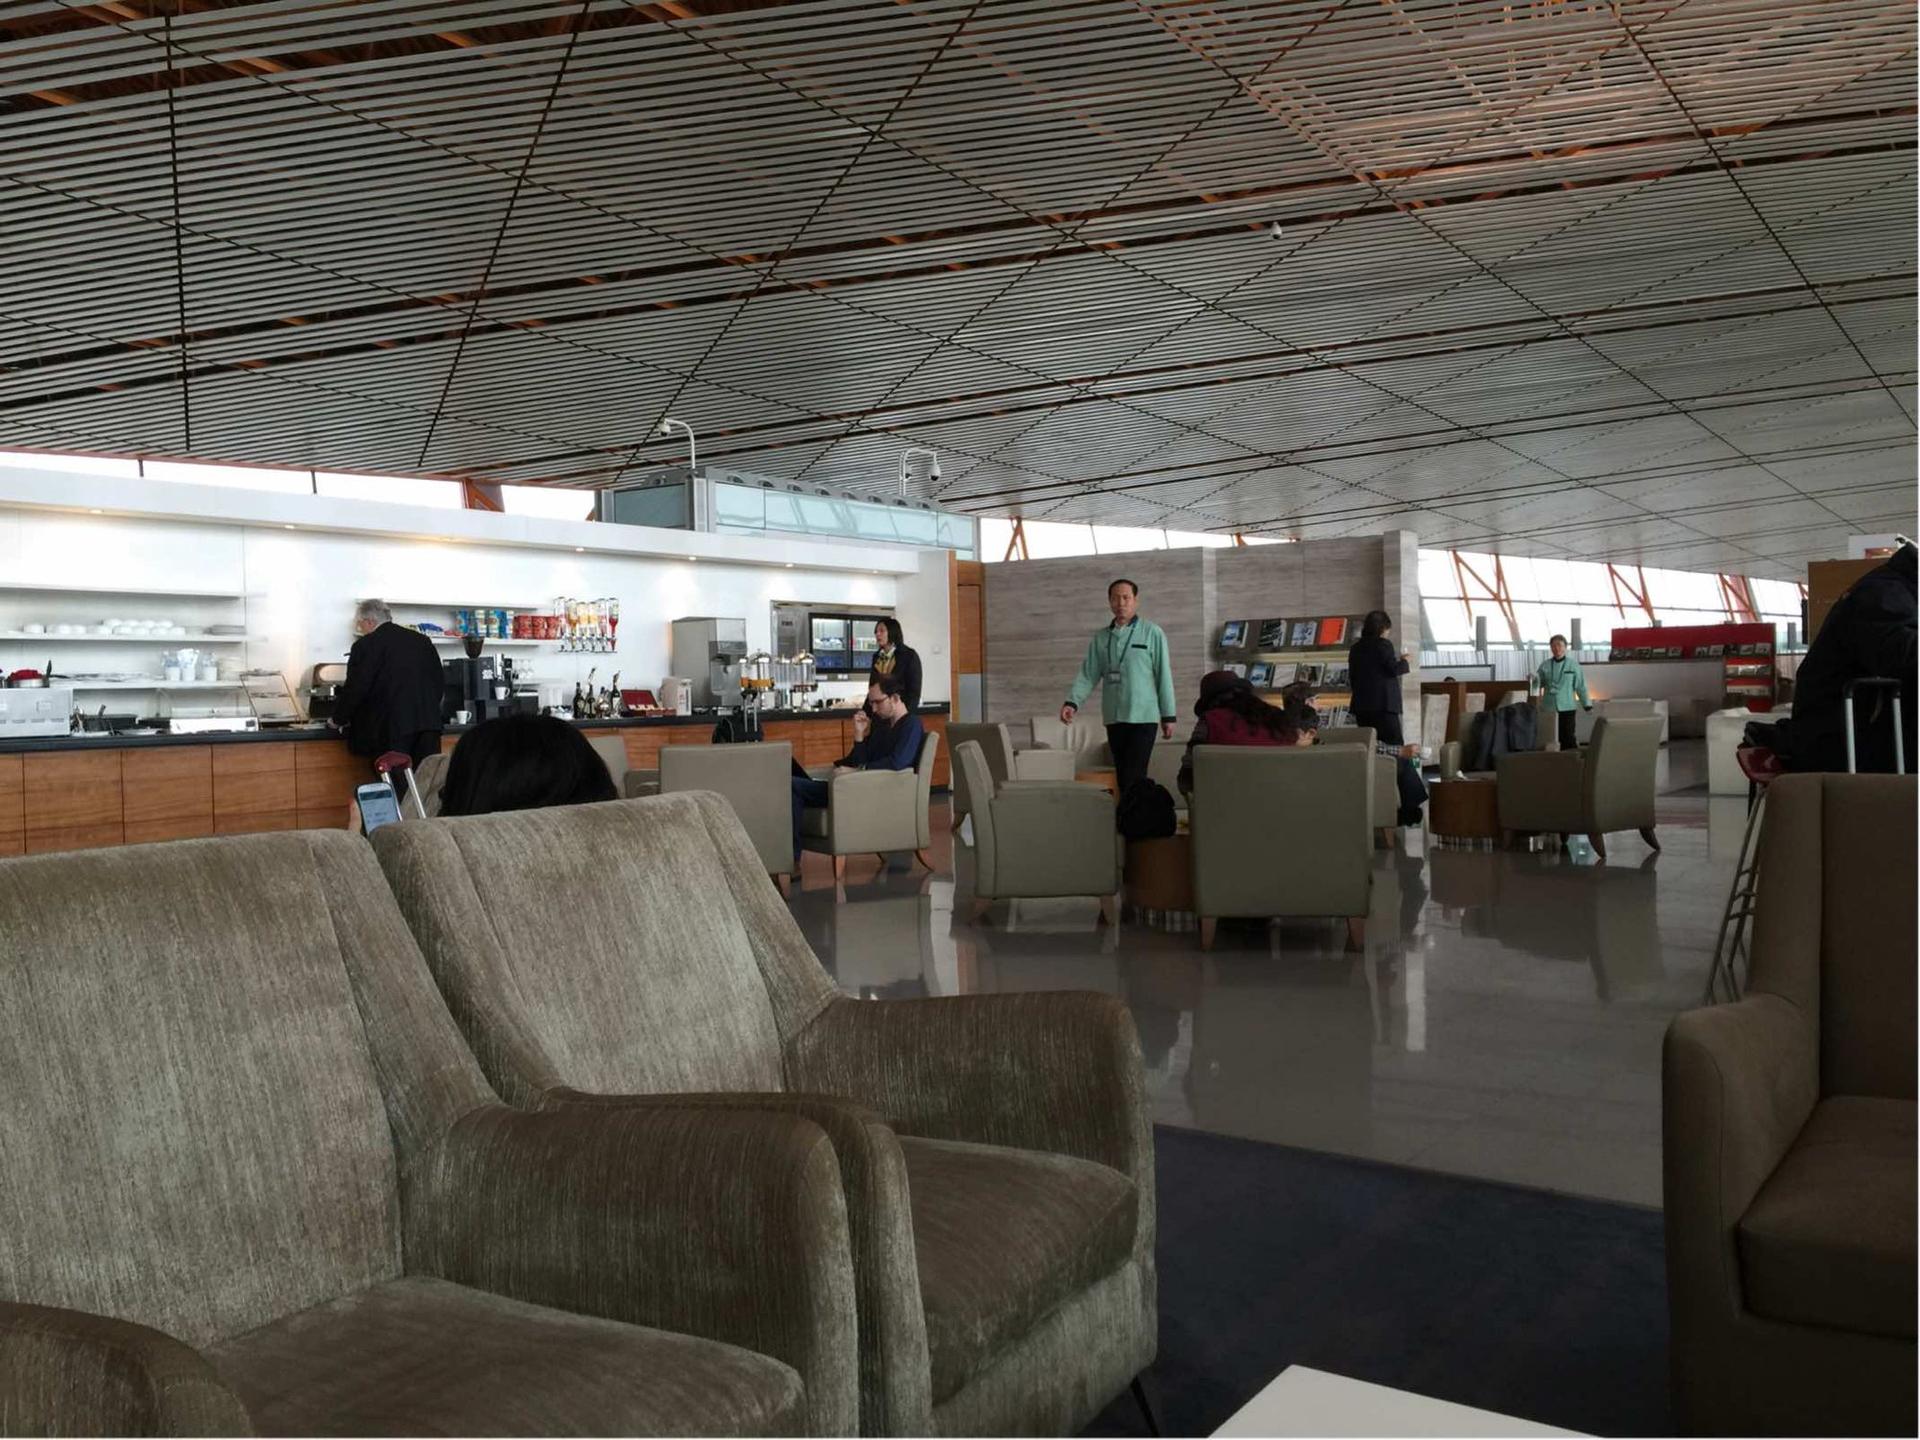 Cathay Pacific Lounge image 4 of 17